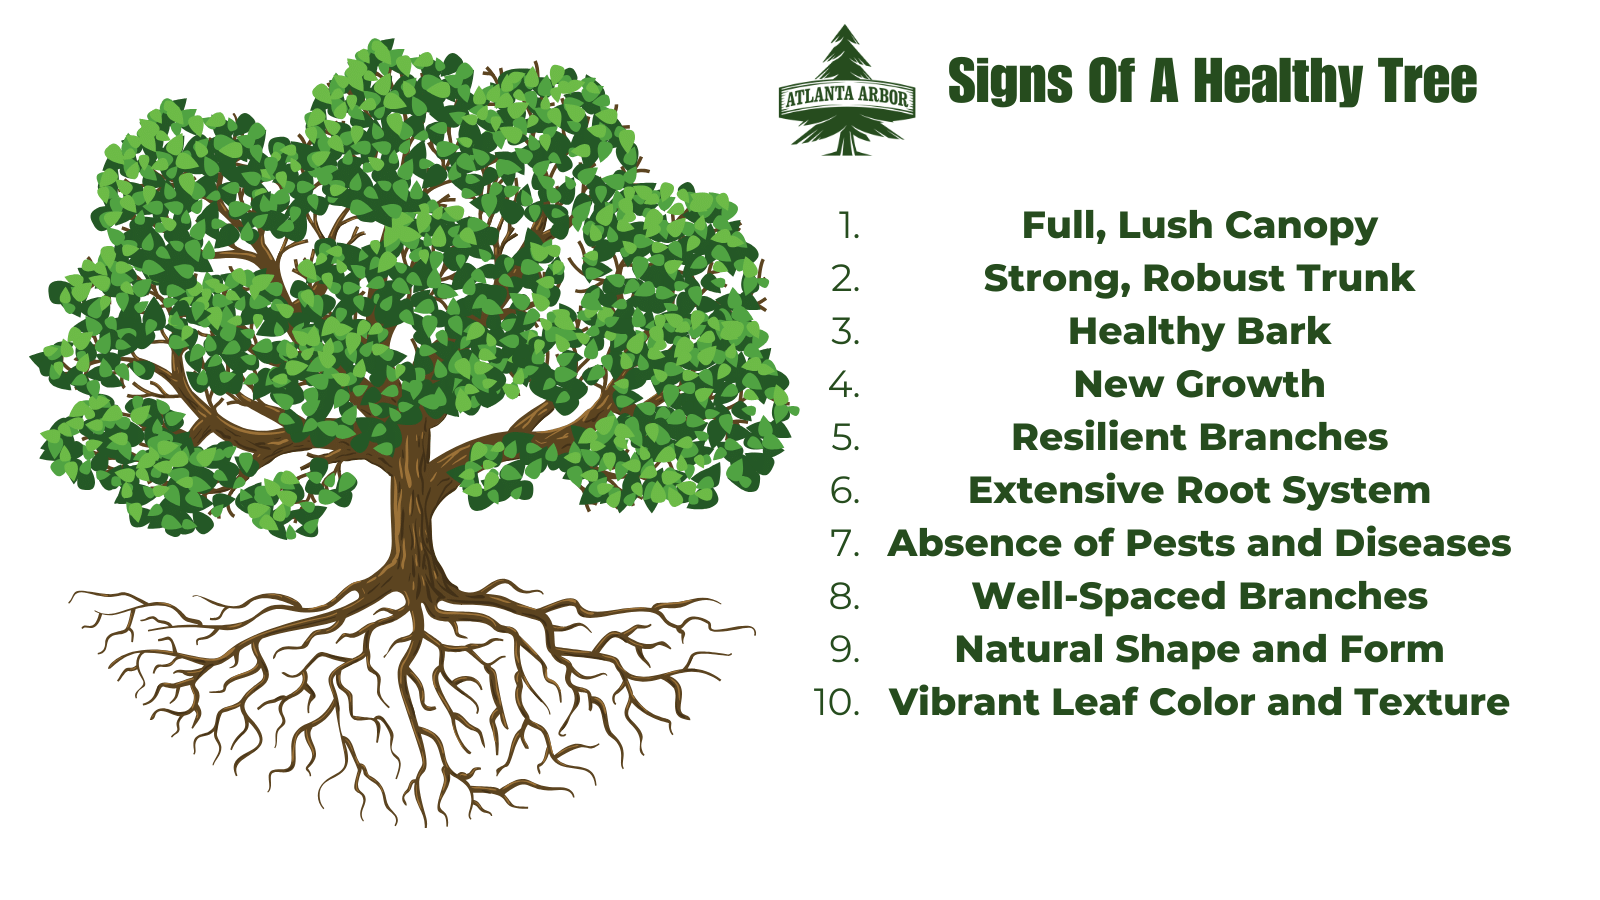 Signs Of A Healthy Tree (bullet point list)